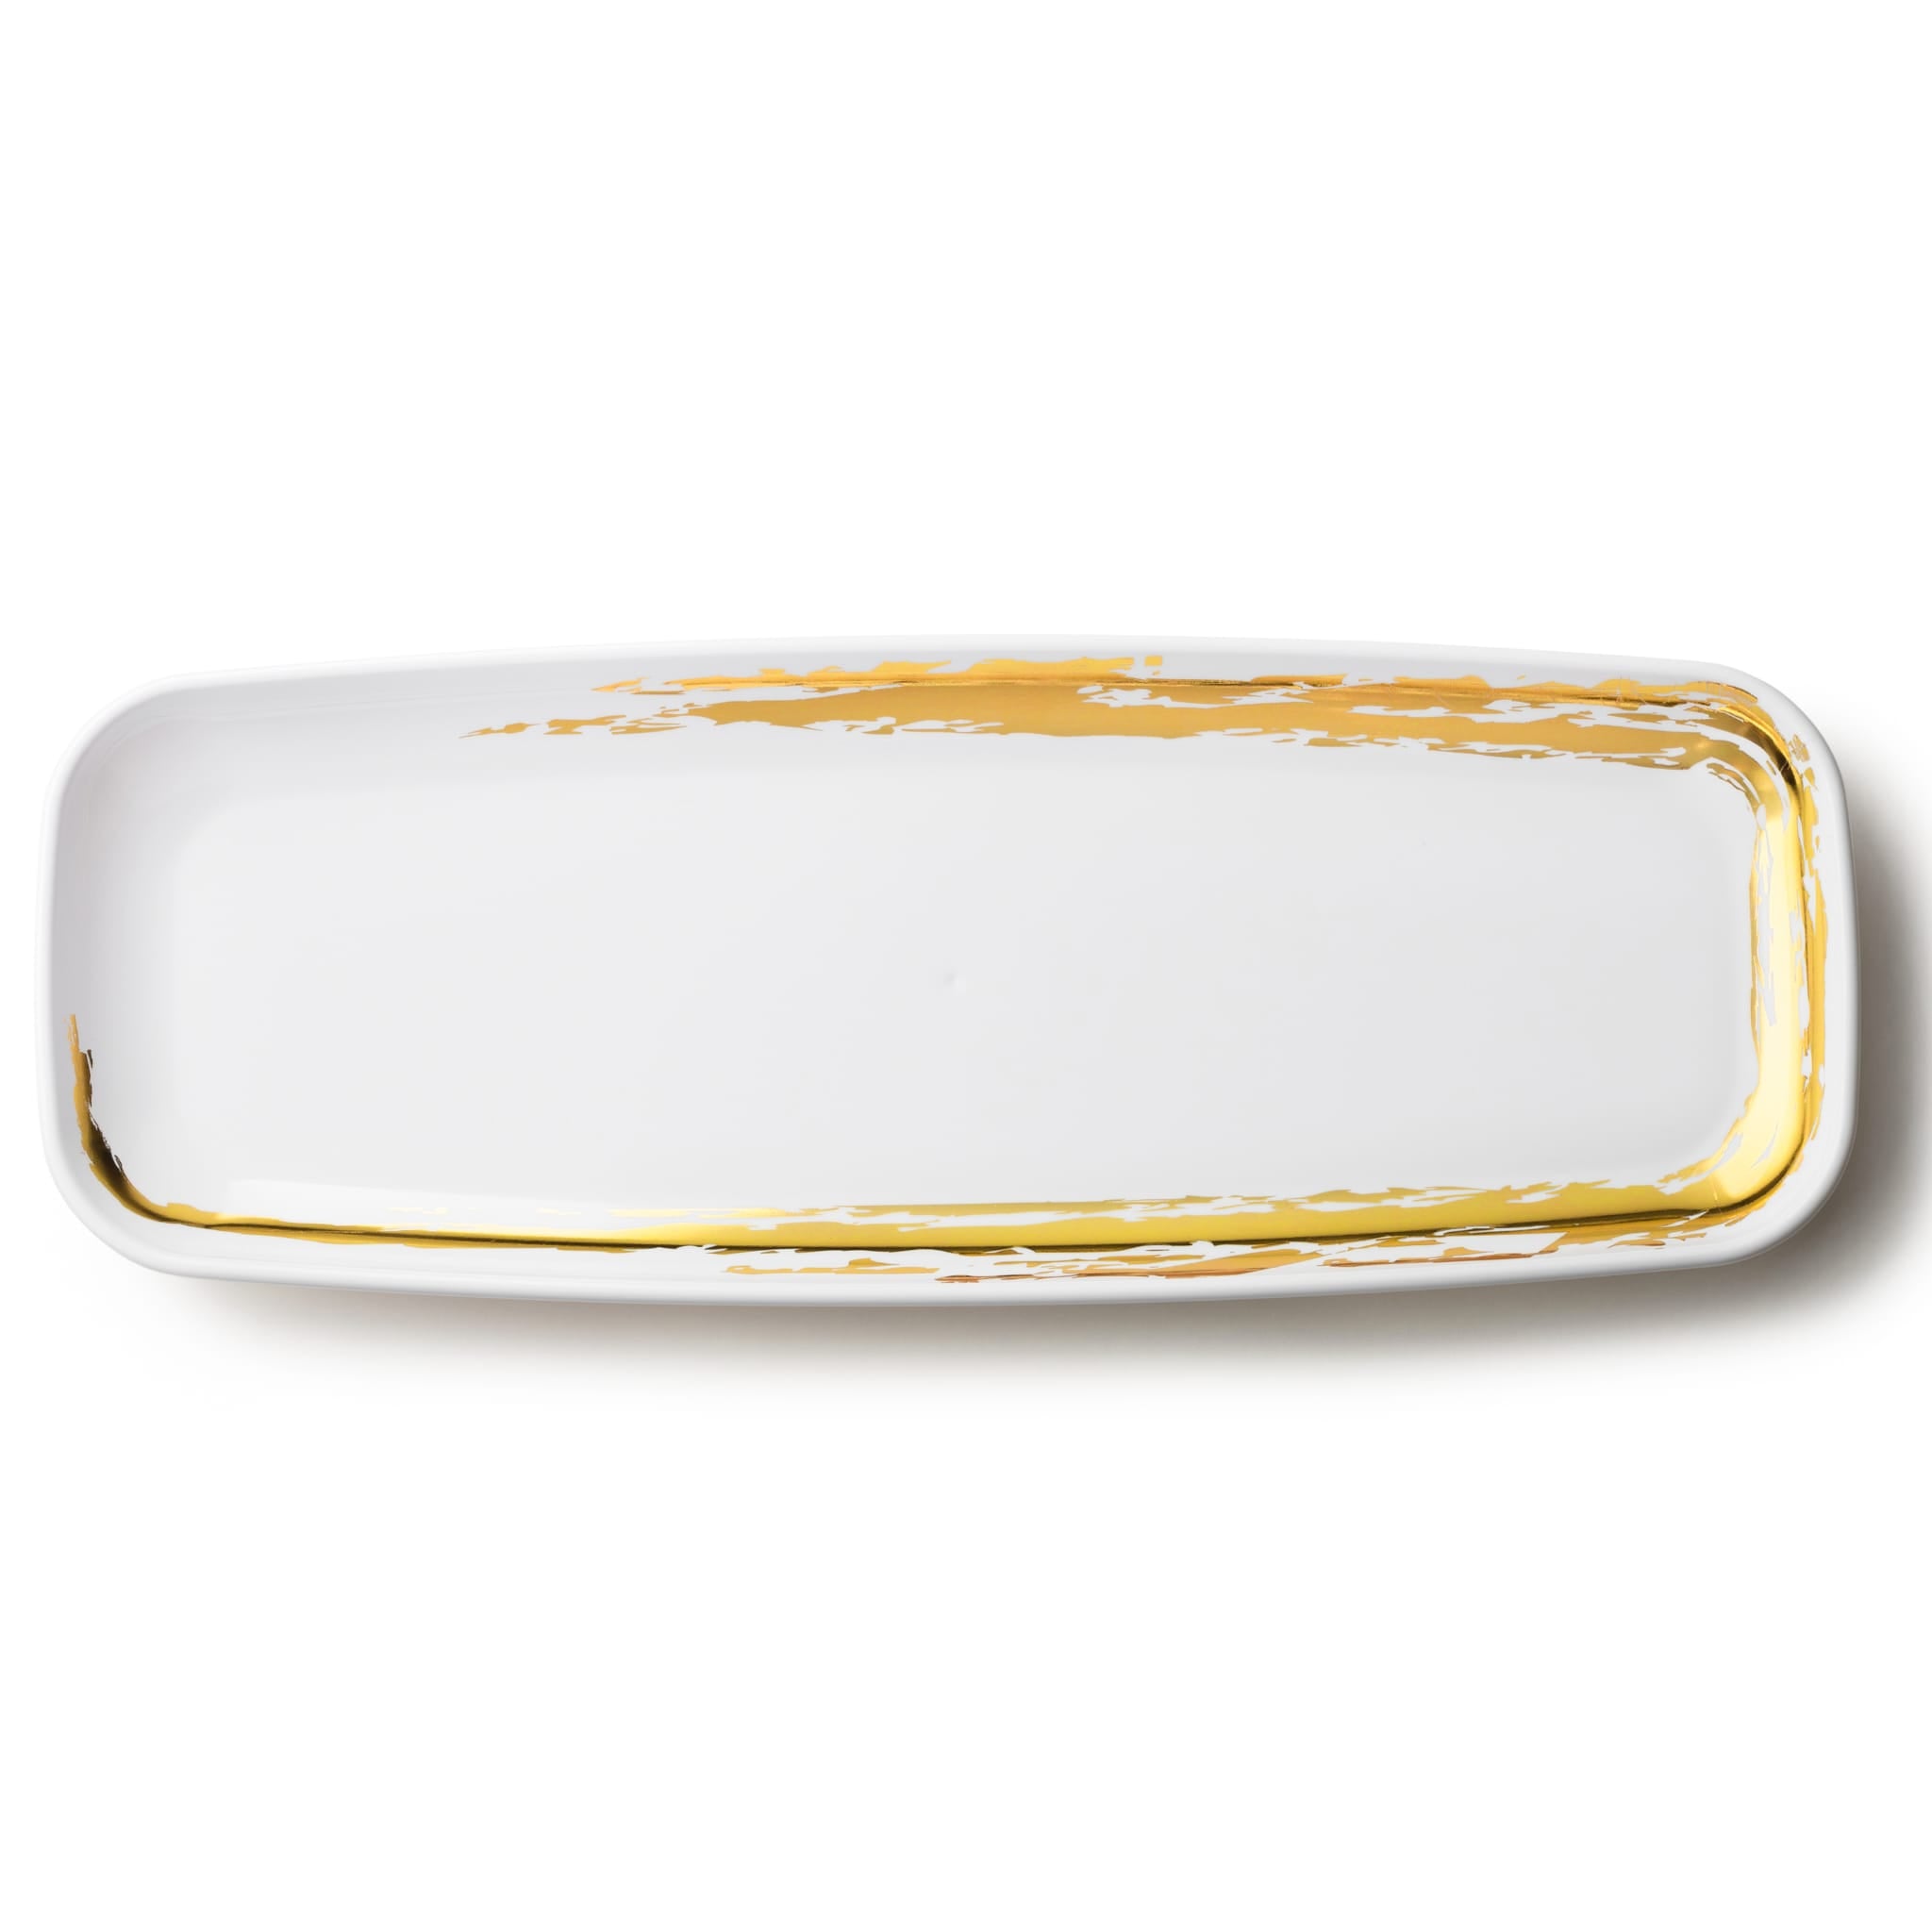 WHITE & GOLD WHISK OVAL TRAY